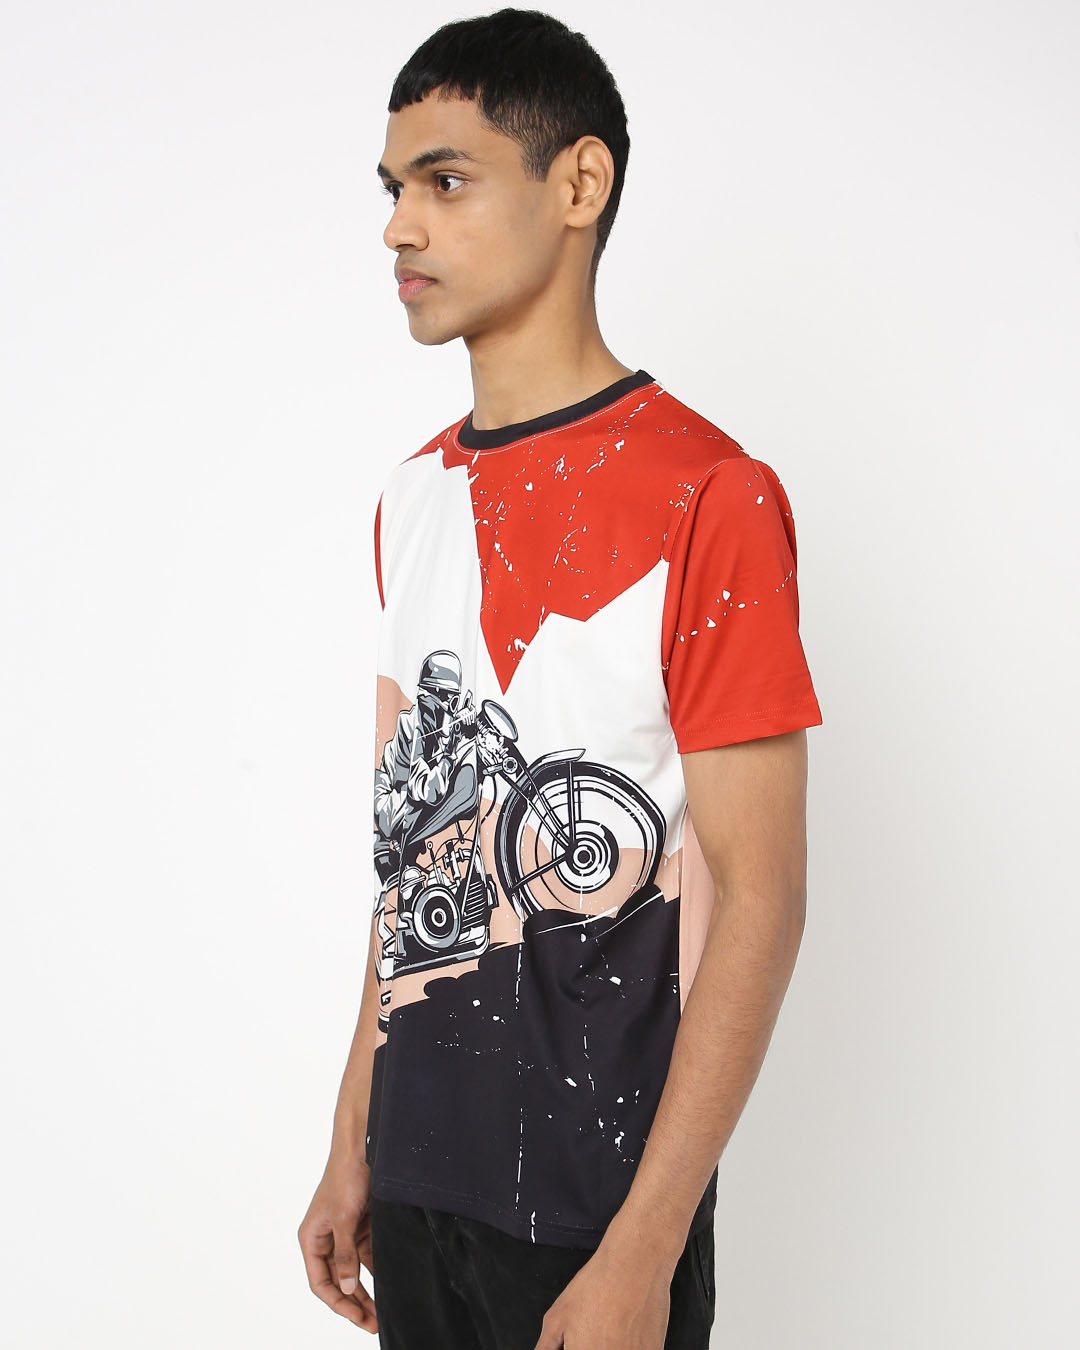 Shop Men's Red & White Bullet Rider Graphic Printed T-shirt-Back